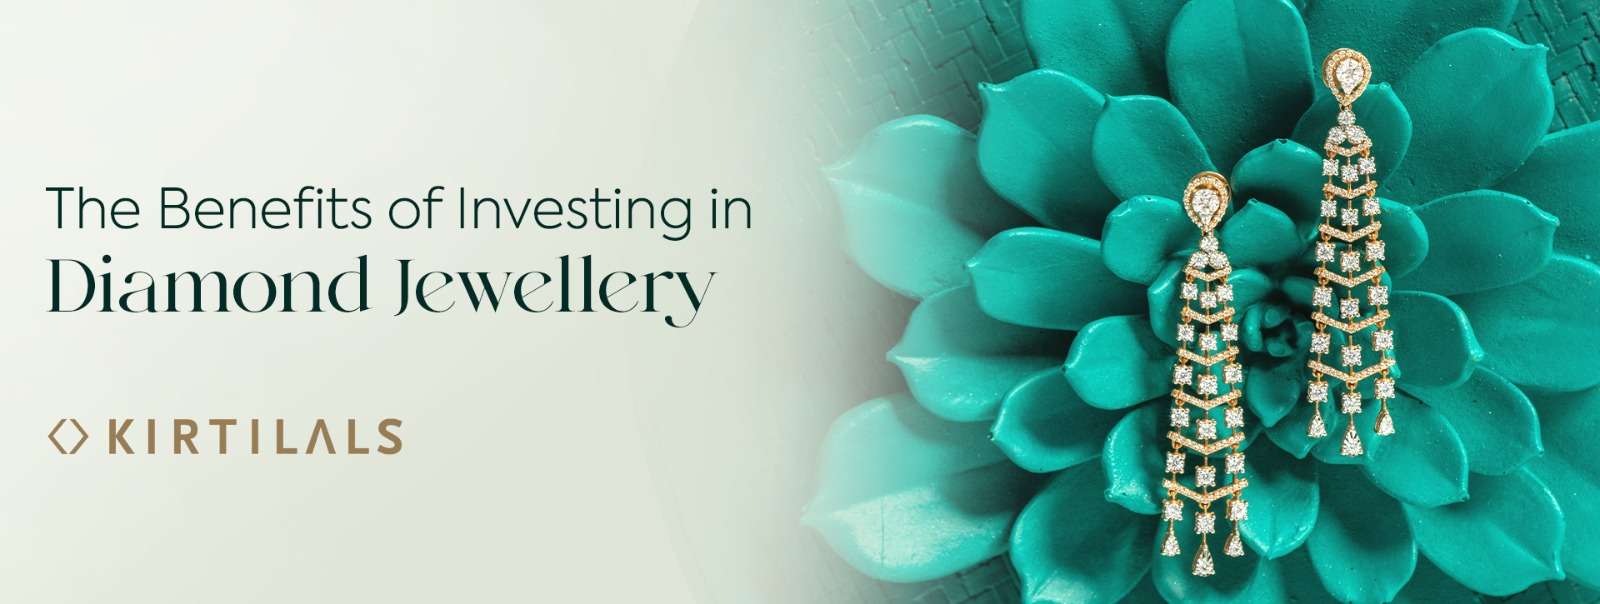 The Benefits of Investing in Diamond Jewellery 